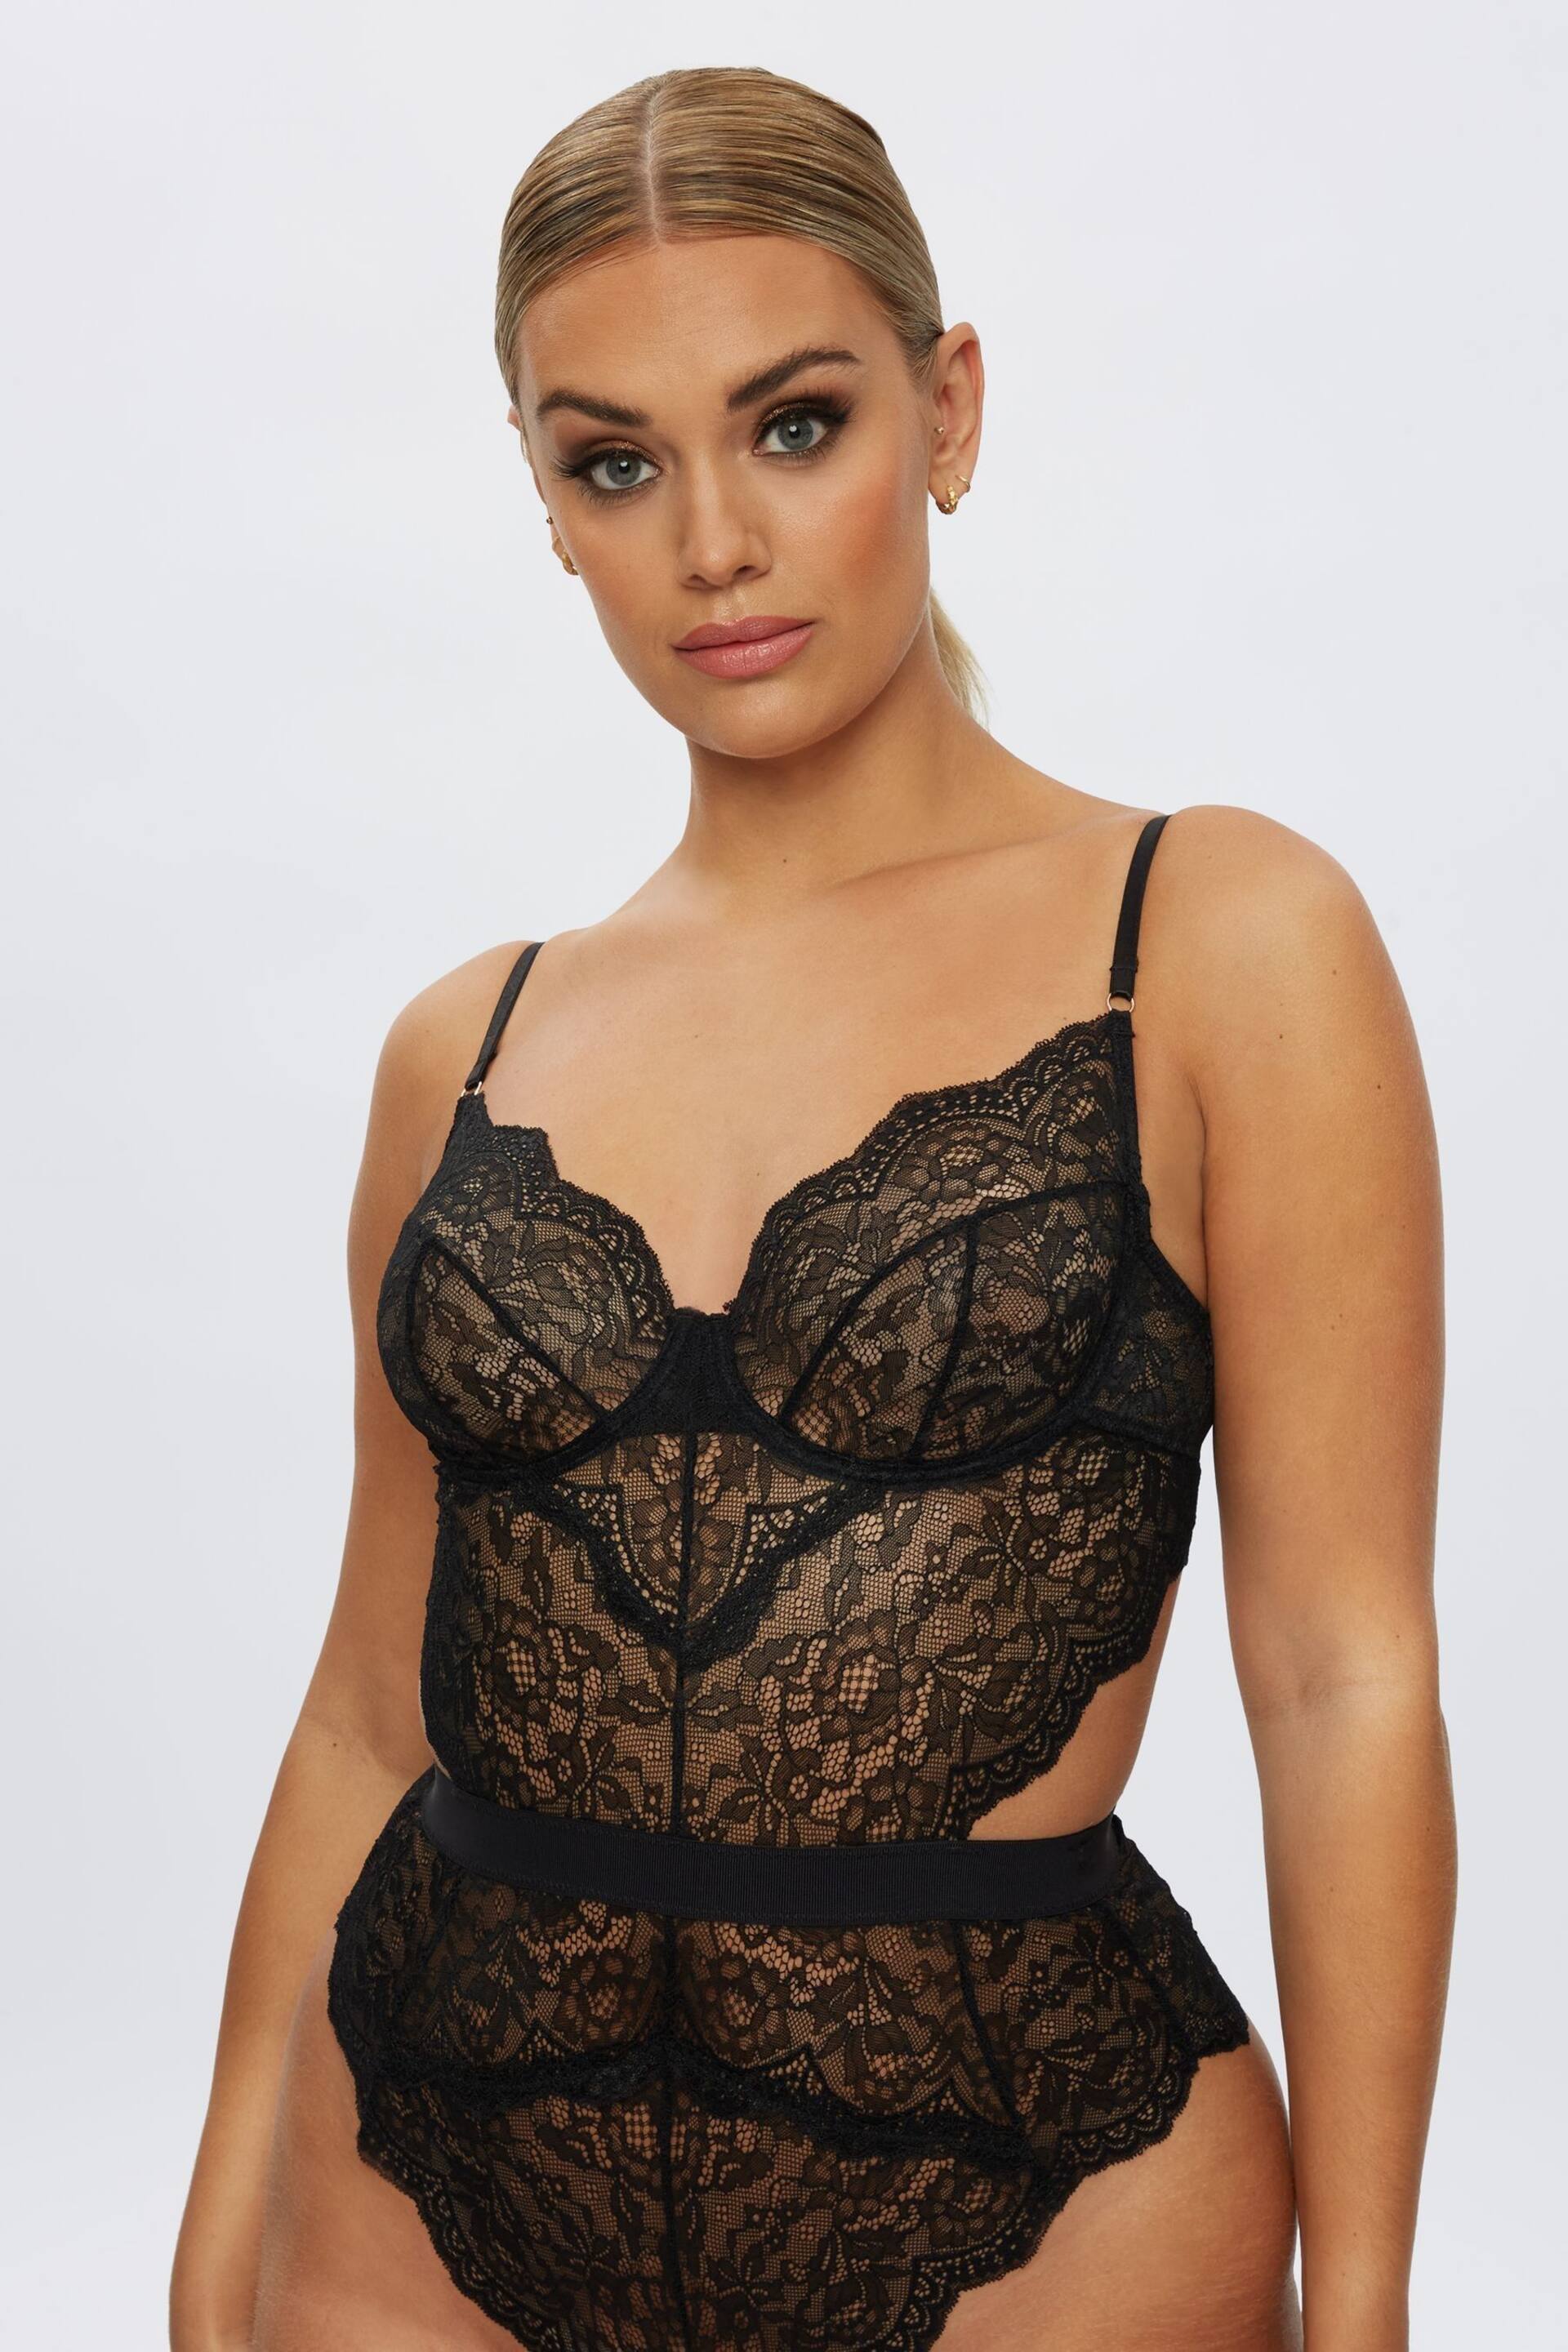 Ann Summers Black 3 Hold Me Tight Lace Bodysuit - Image 6 of 7